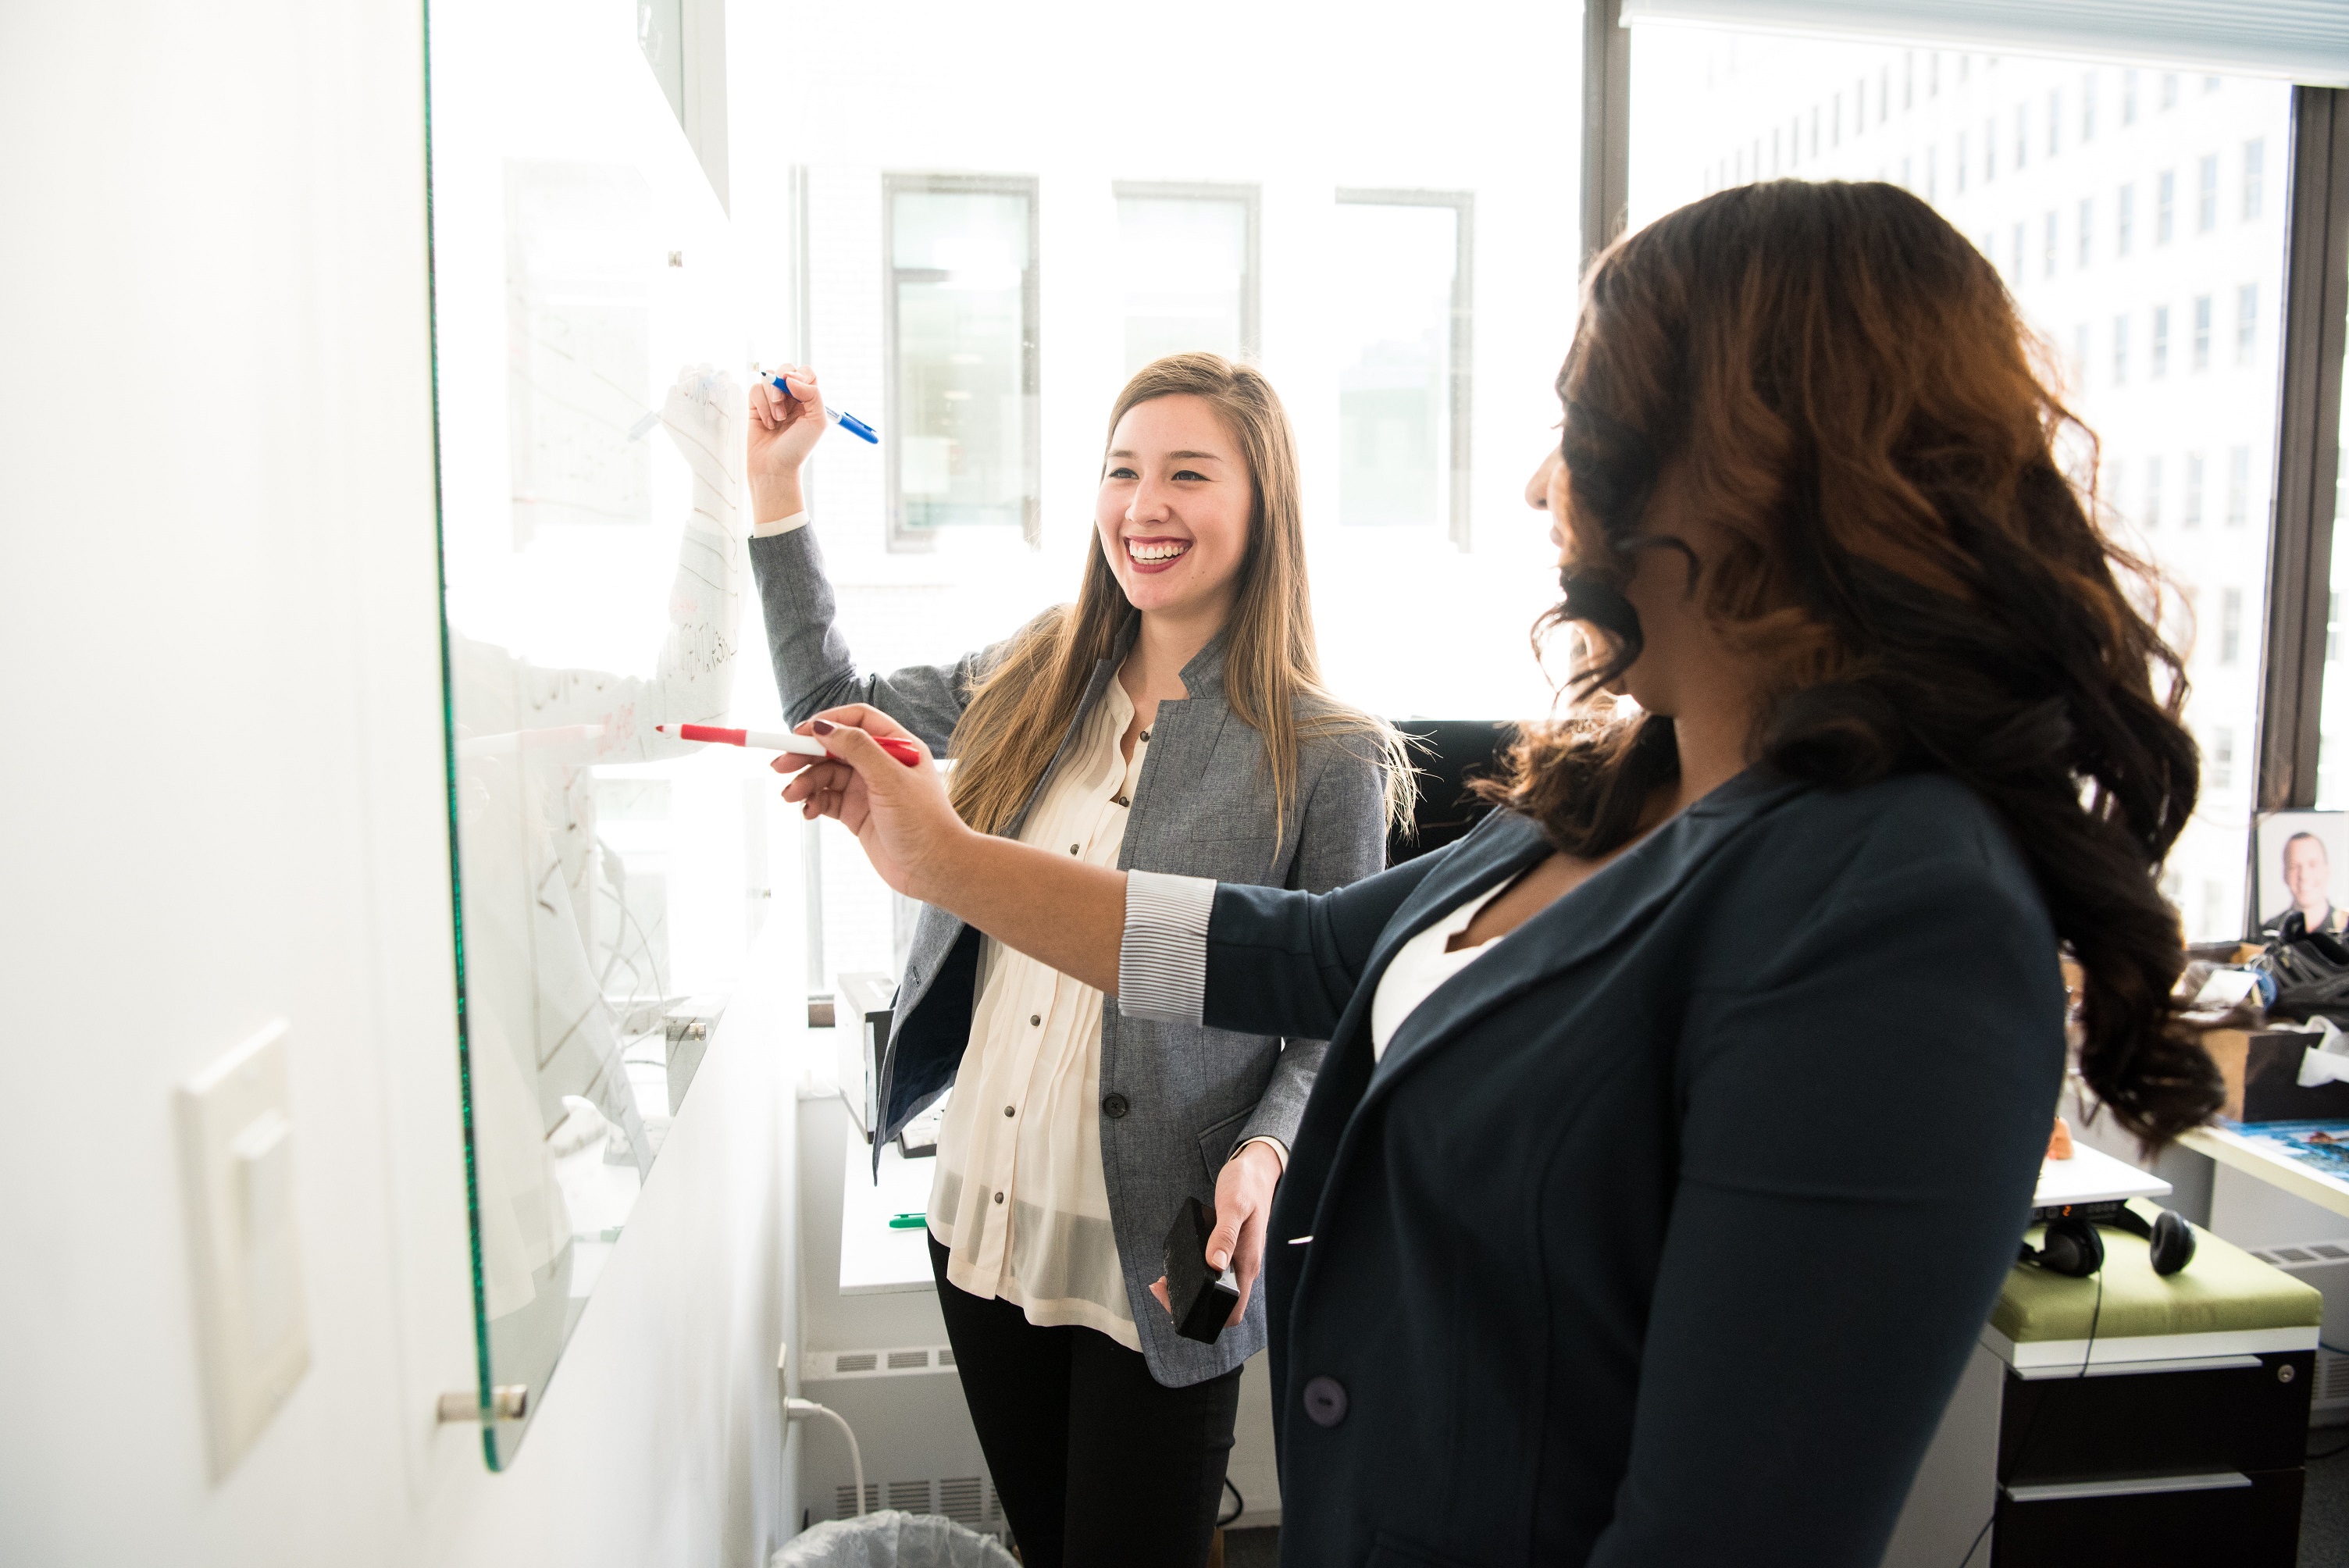 Two women smiling while writing on a whiteboard